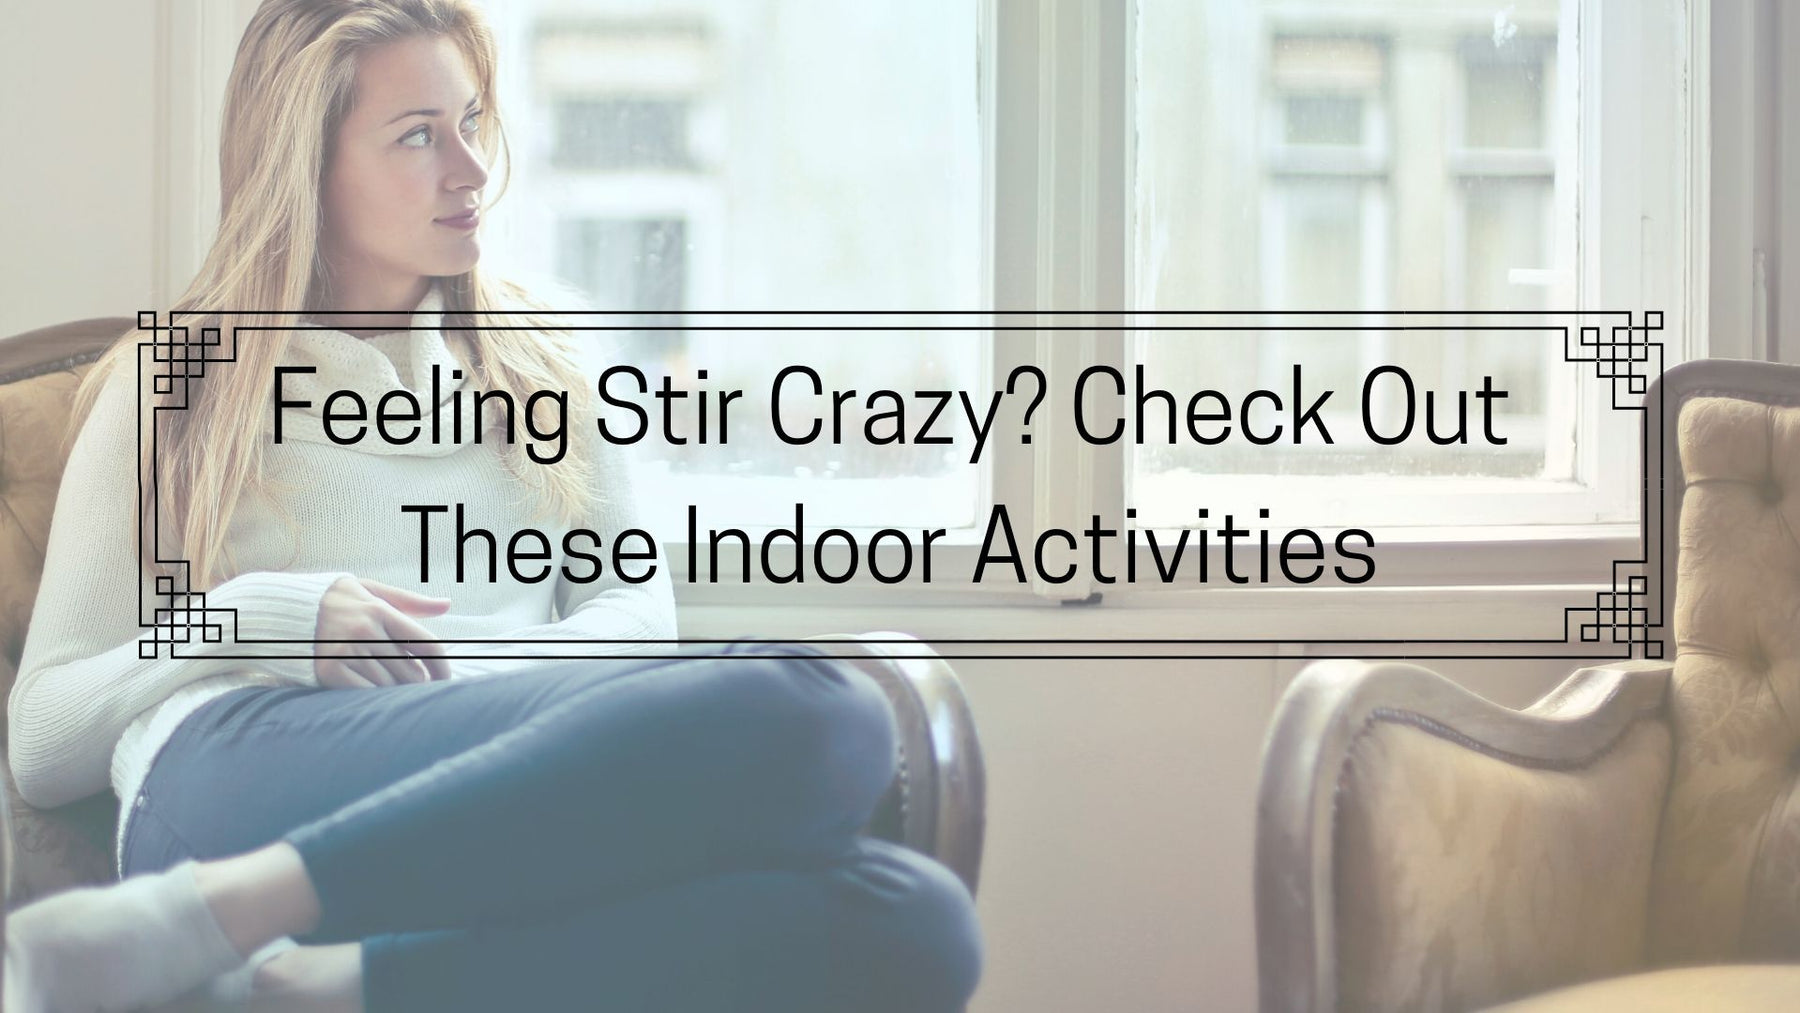 Person - Feeling Stir Crazy? Check Out These Indoor Activities